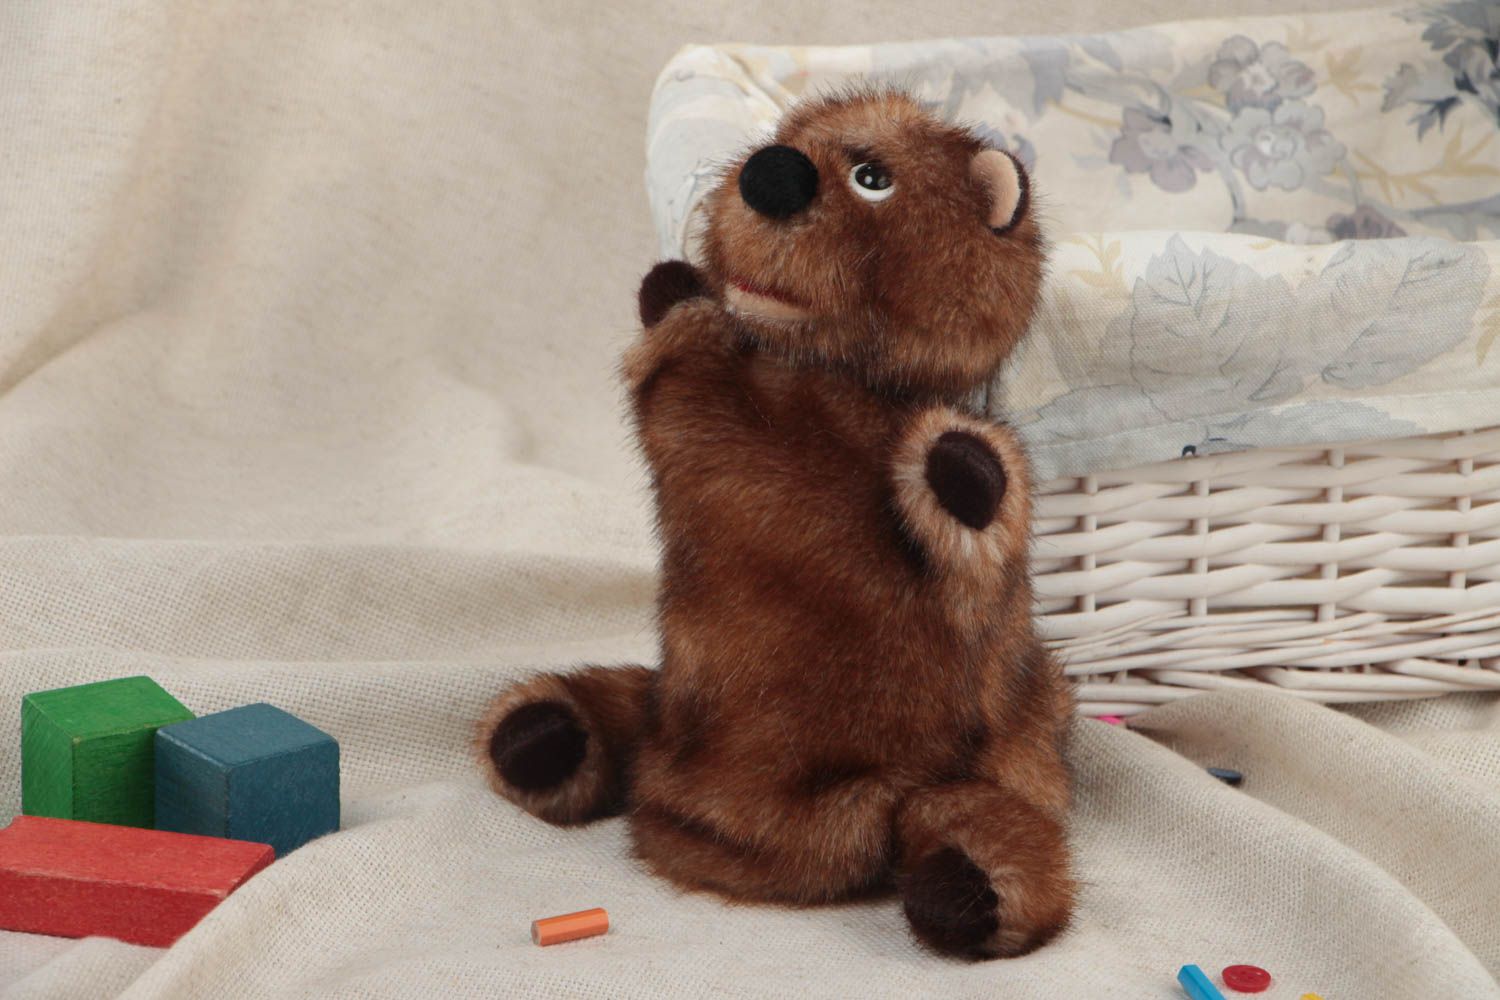 Handmade soft glove toy sewn of brown faux fur bear cub for puppet theater photo 1